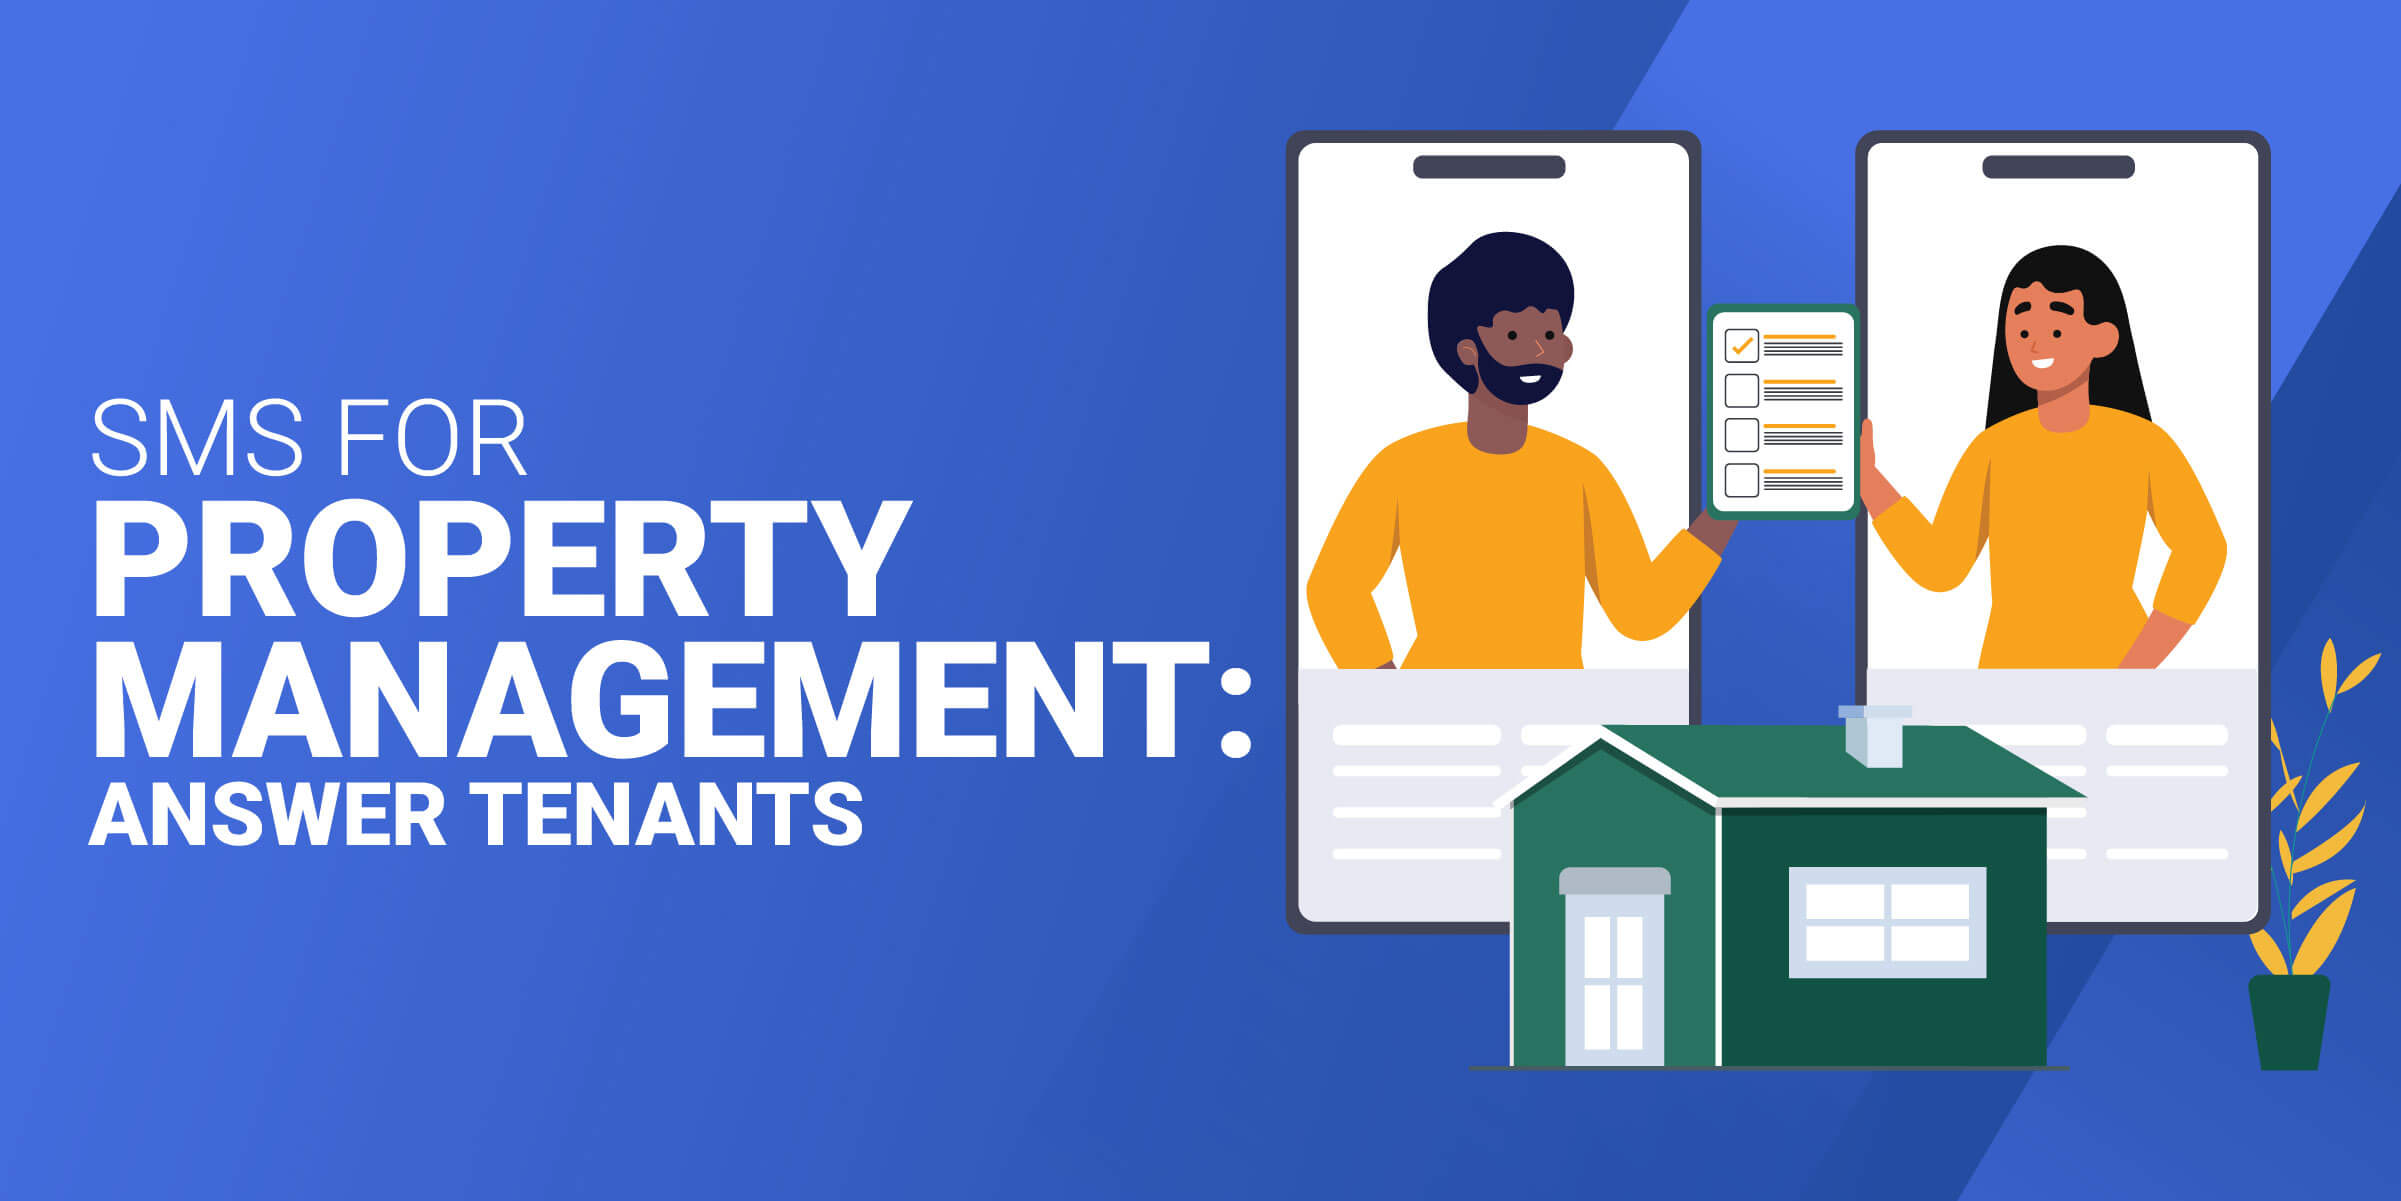 SMS Property Management Answer Tenants